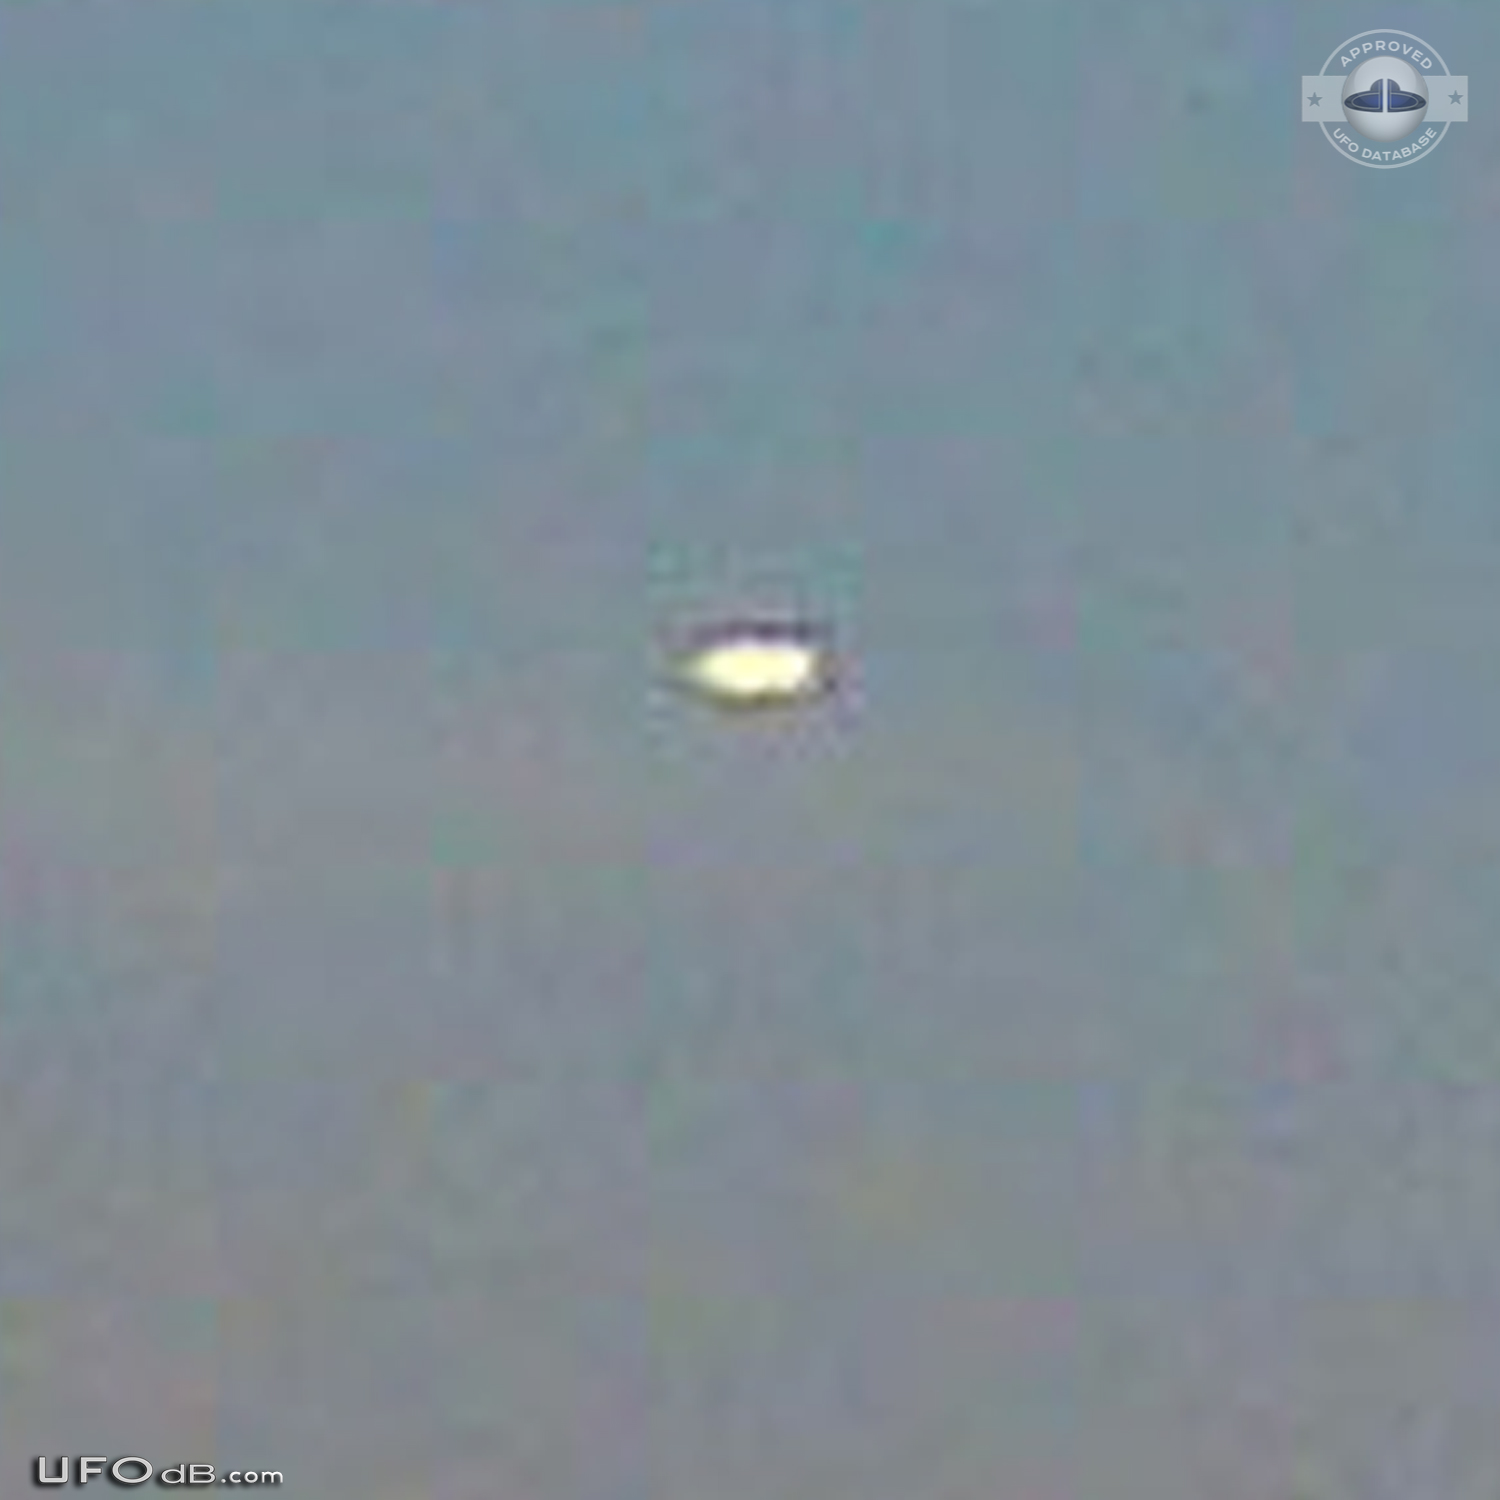 Friends Picture reveals UFO over Buenos Aires in Argentina May 2009 UFO Picture #607-5